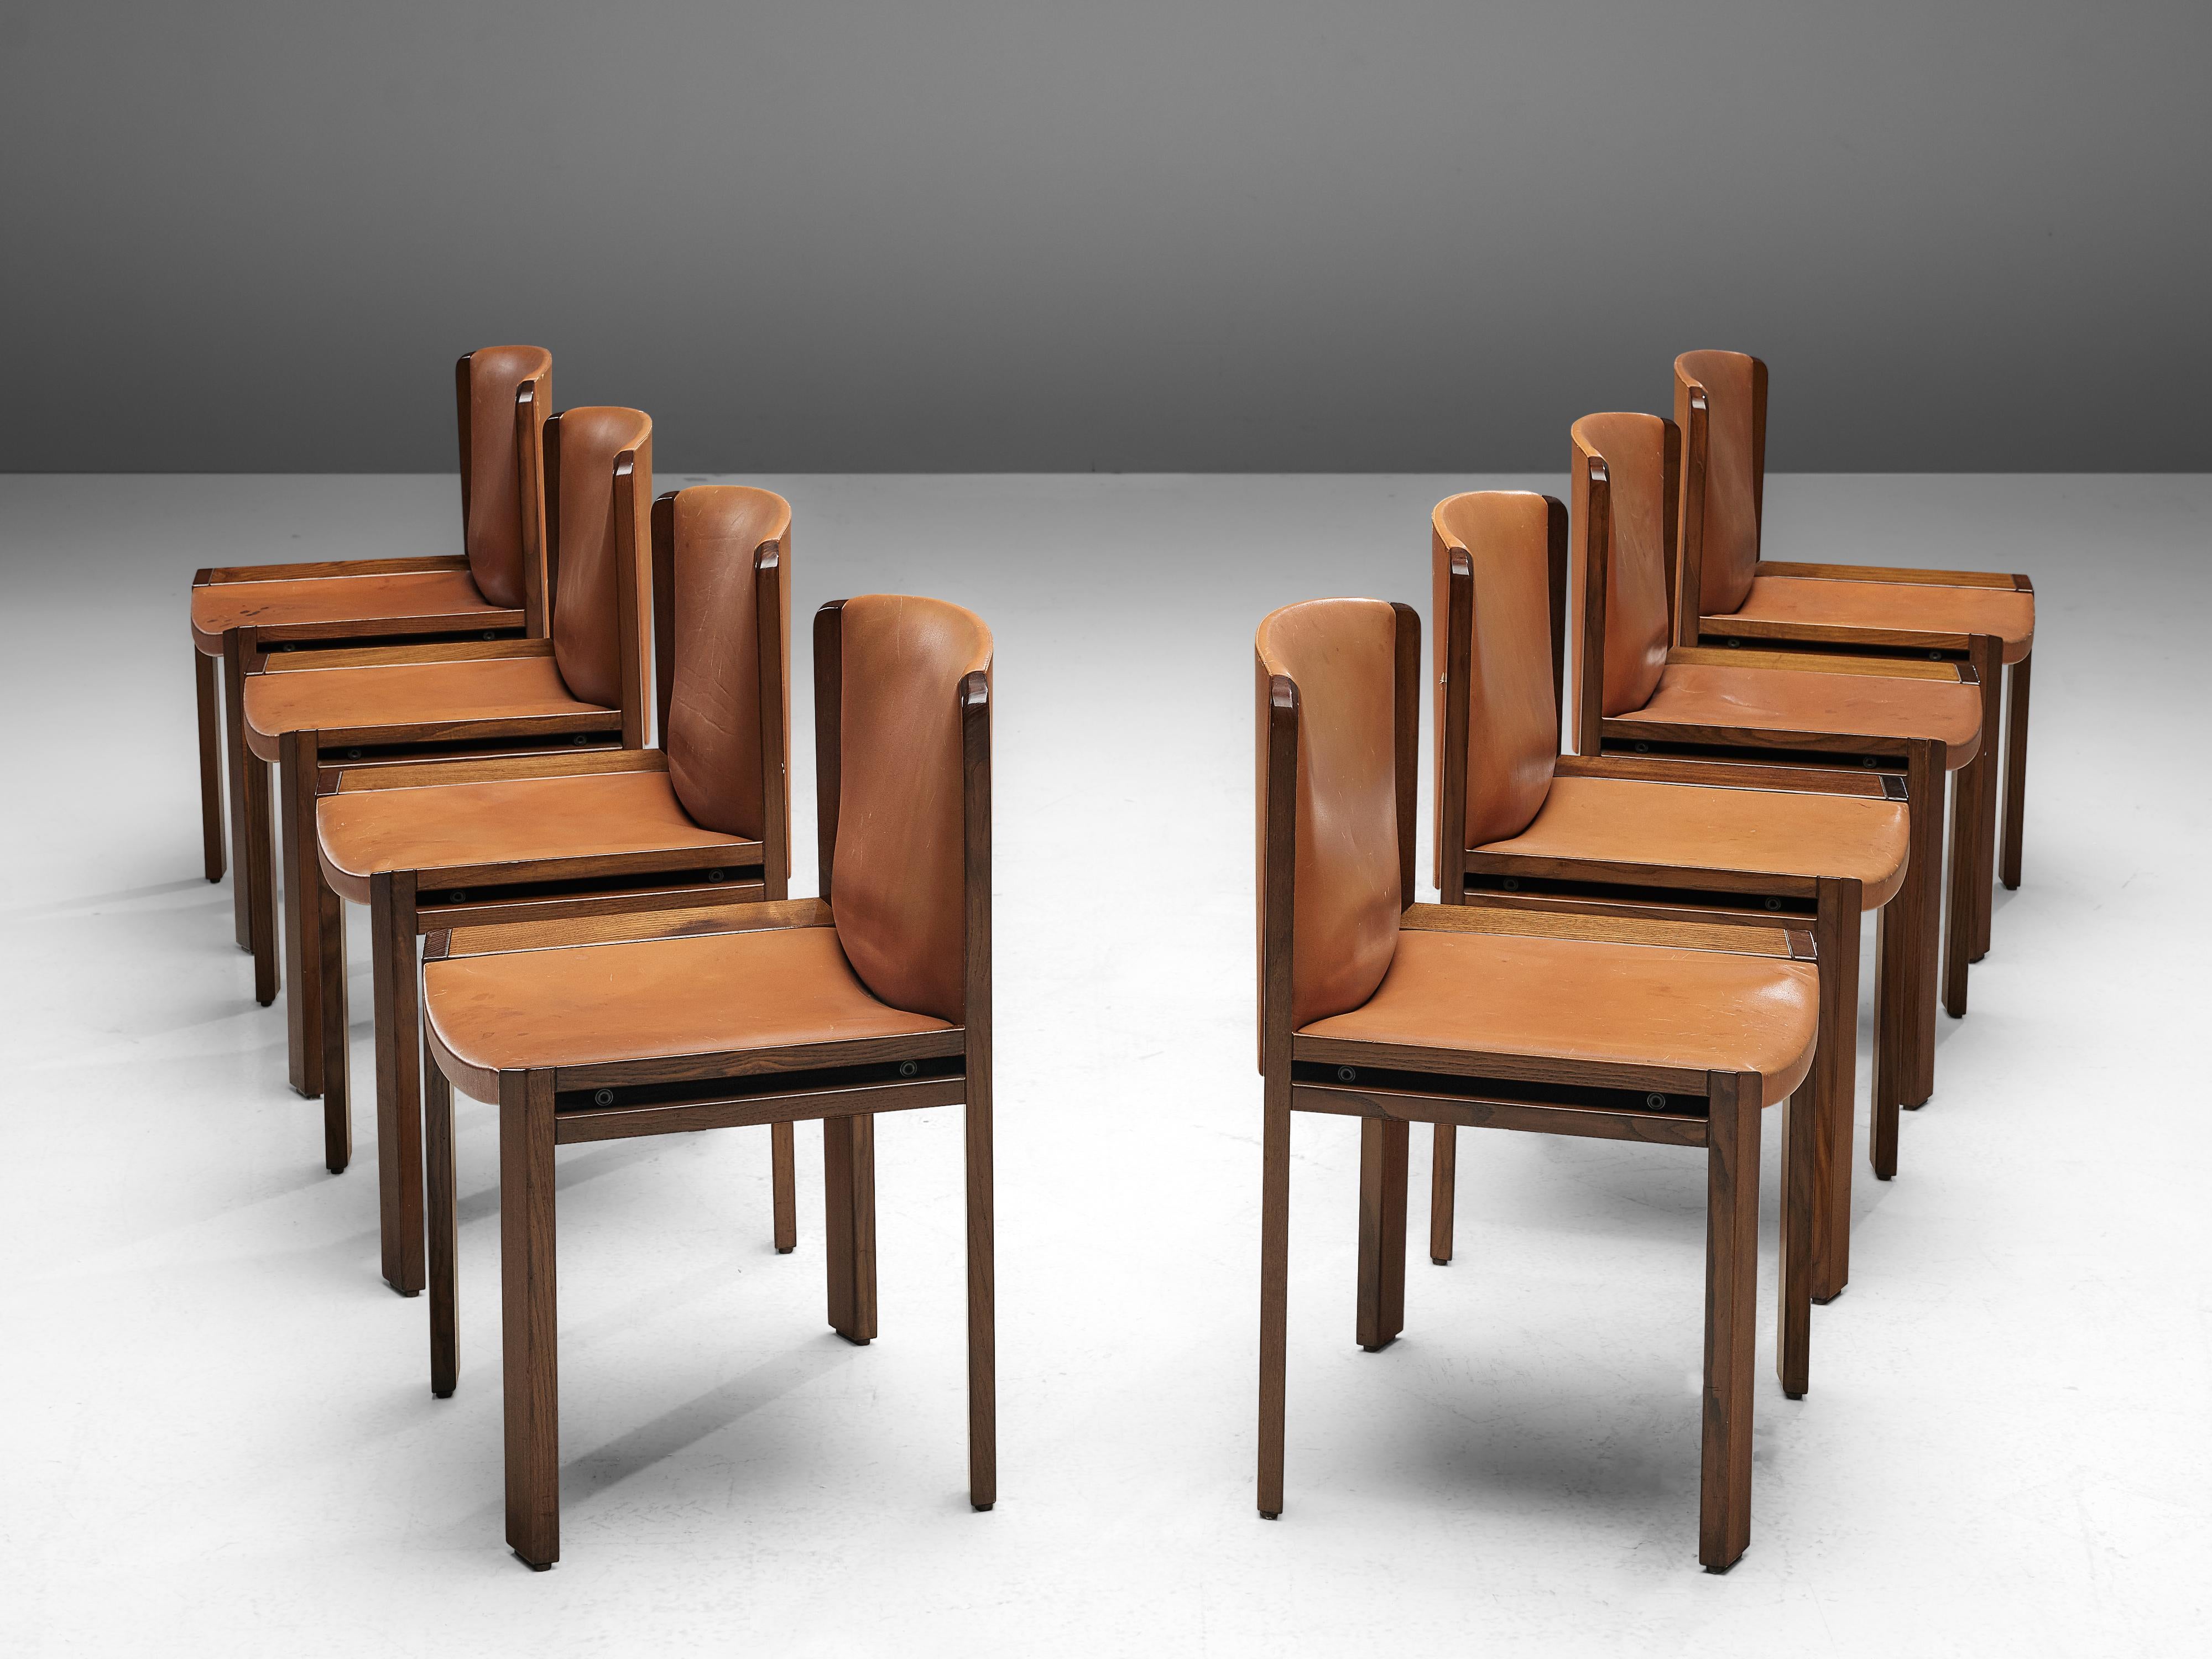 Joe Colombo for Pozzi, set of eight dining chairs '300', leather, oak, Italy, 1966

Functionalist set of eight dining chairs is designed by Joe Colombo in 1966. Colombo's fascination with functionality meant he always focused on the user, which lead